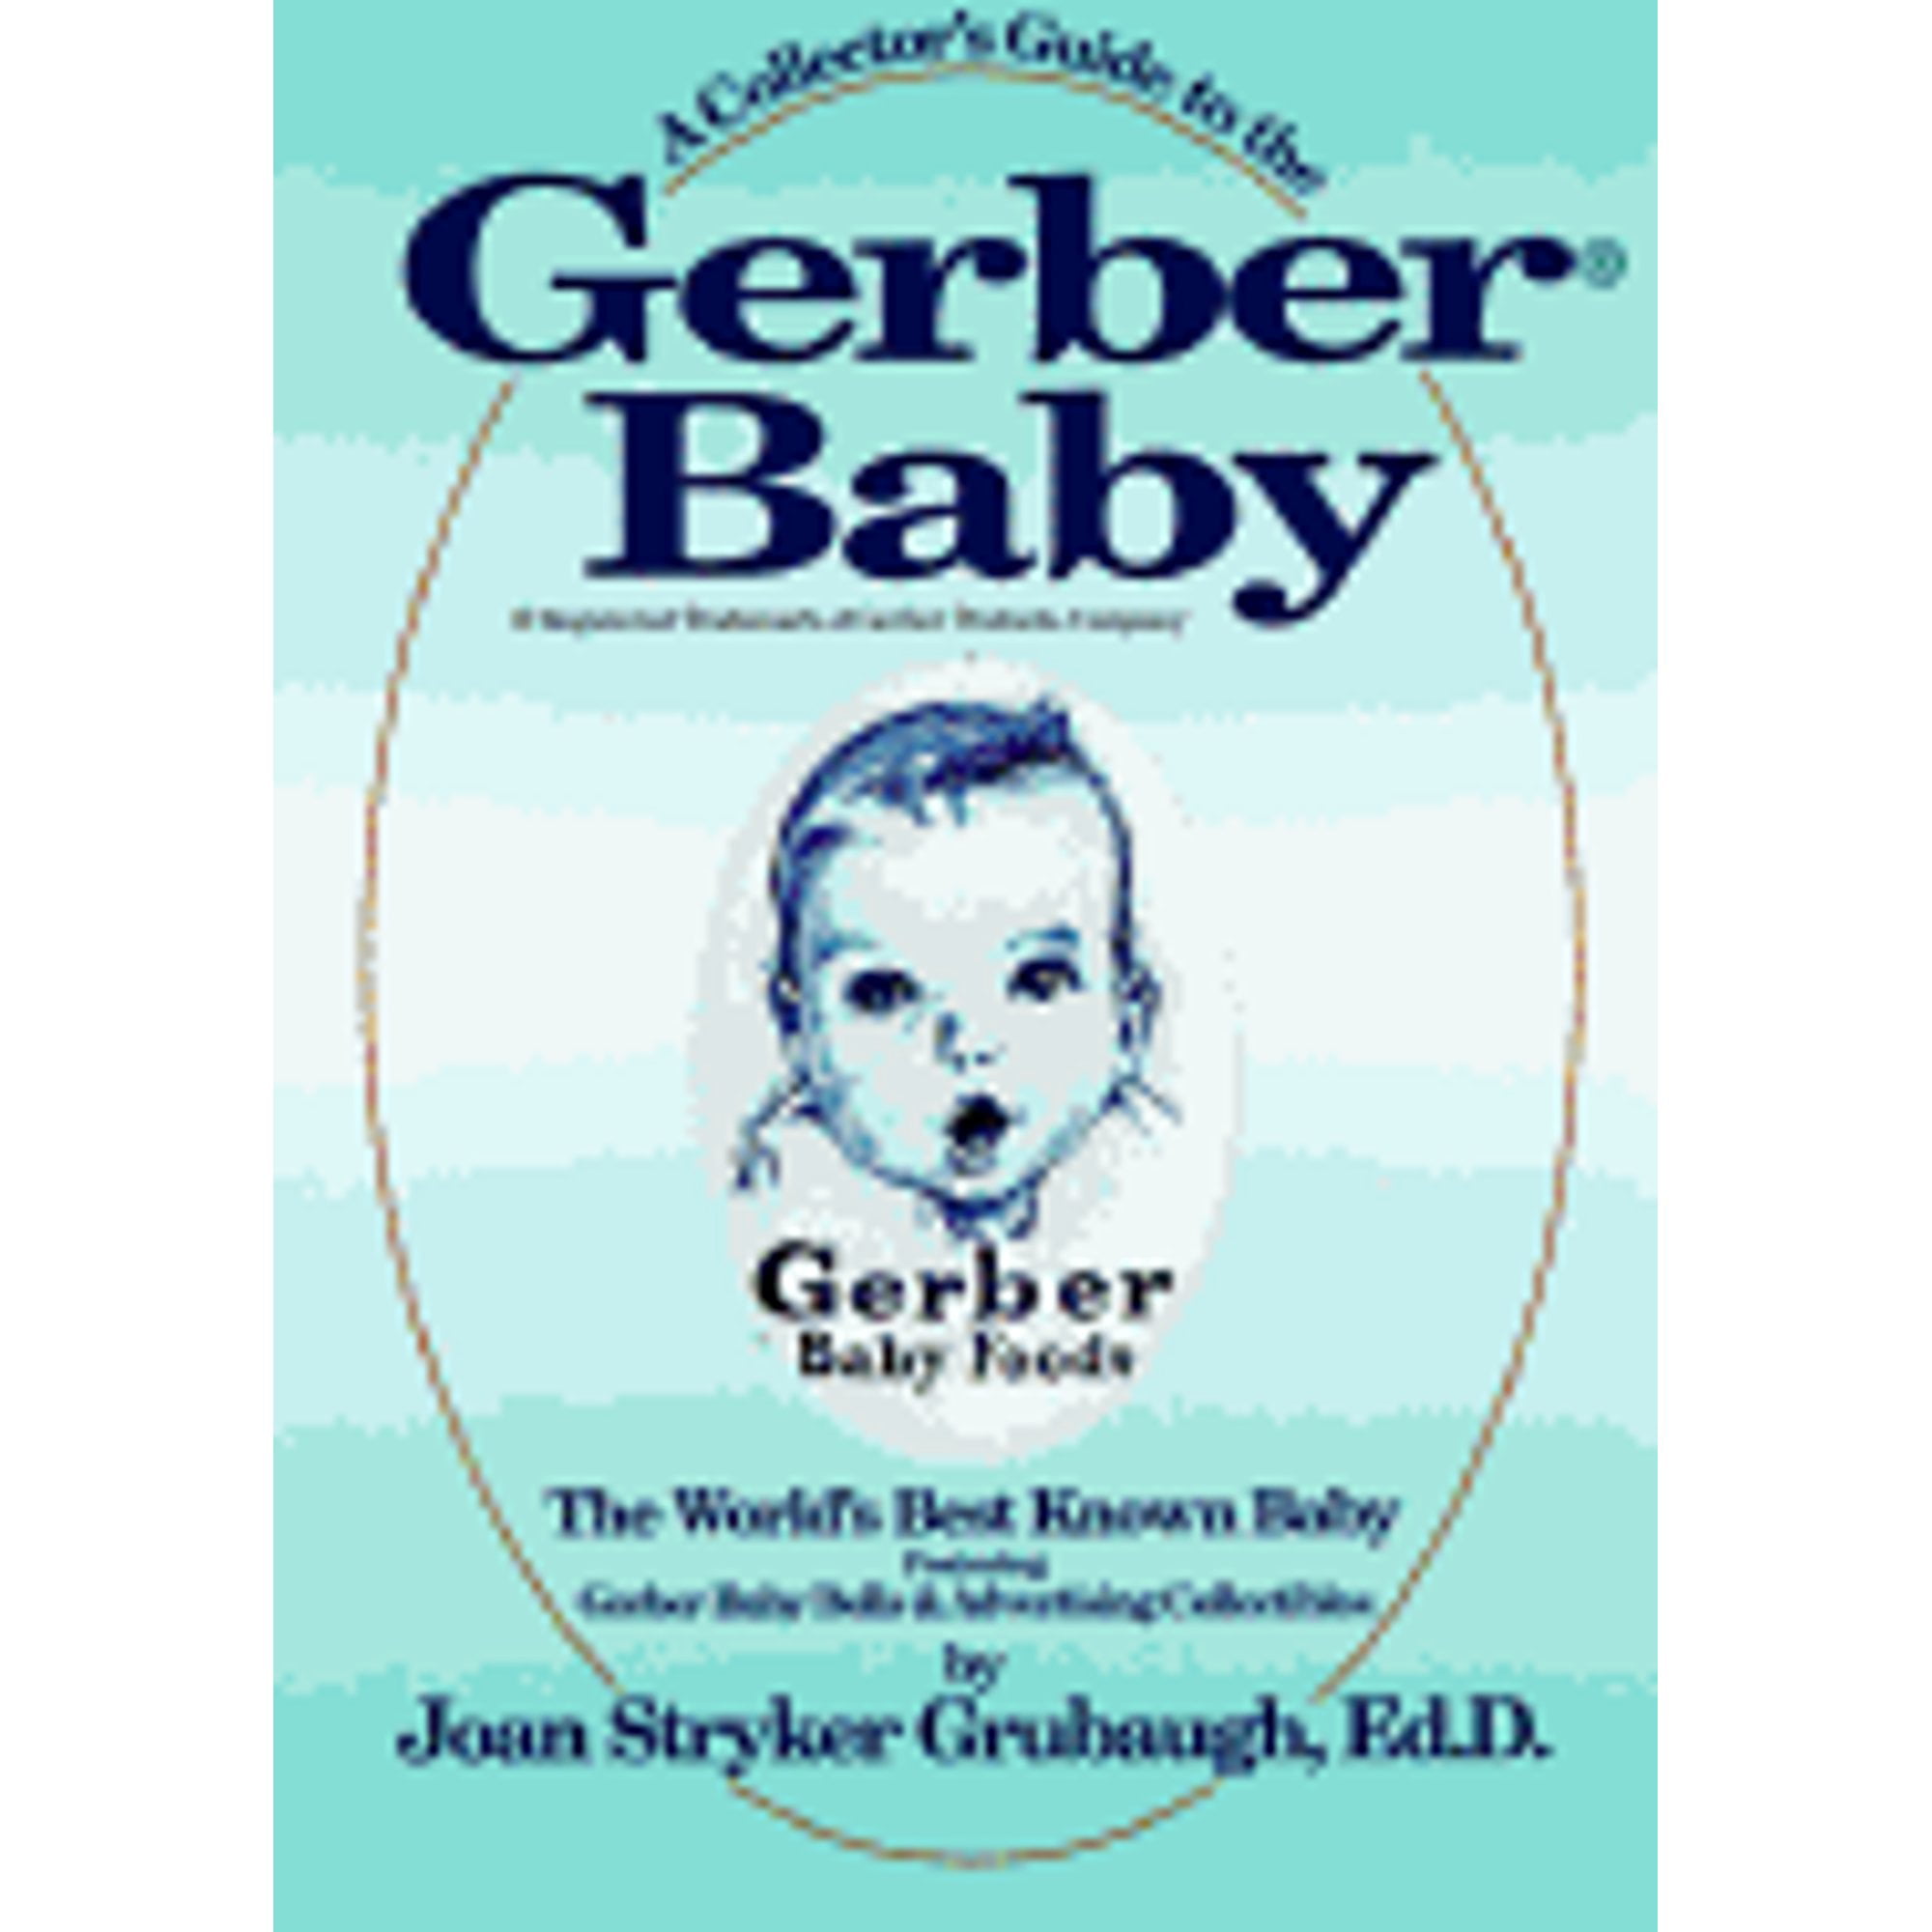 Pre-Owned A Collector's Guide to the Gerber Baby: The World's Best Known Baby, Featuring Baby (Hardcover 9780965464703) by Joan Stryker Grubaugh, Ann T Cook, Edward Mobley